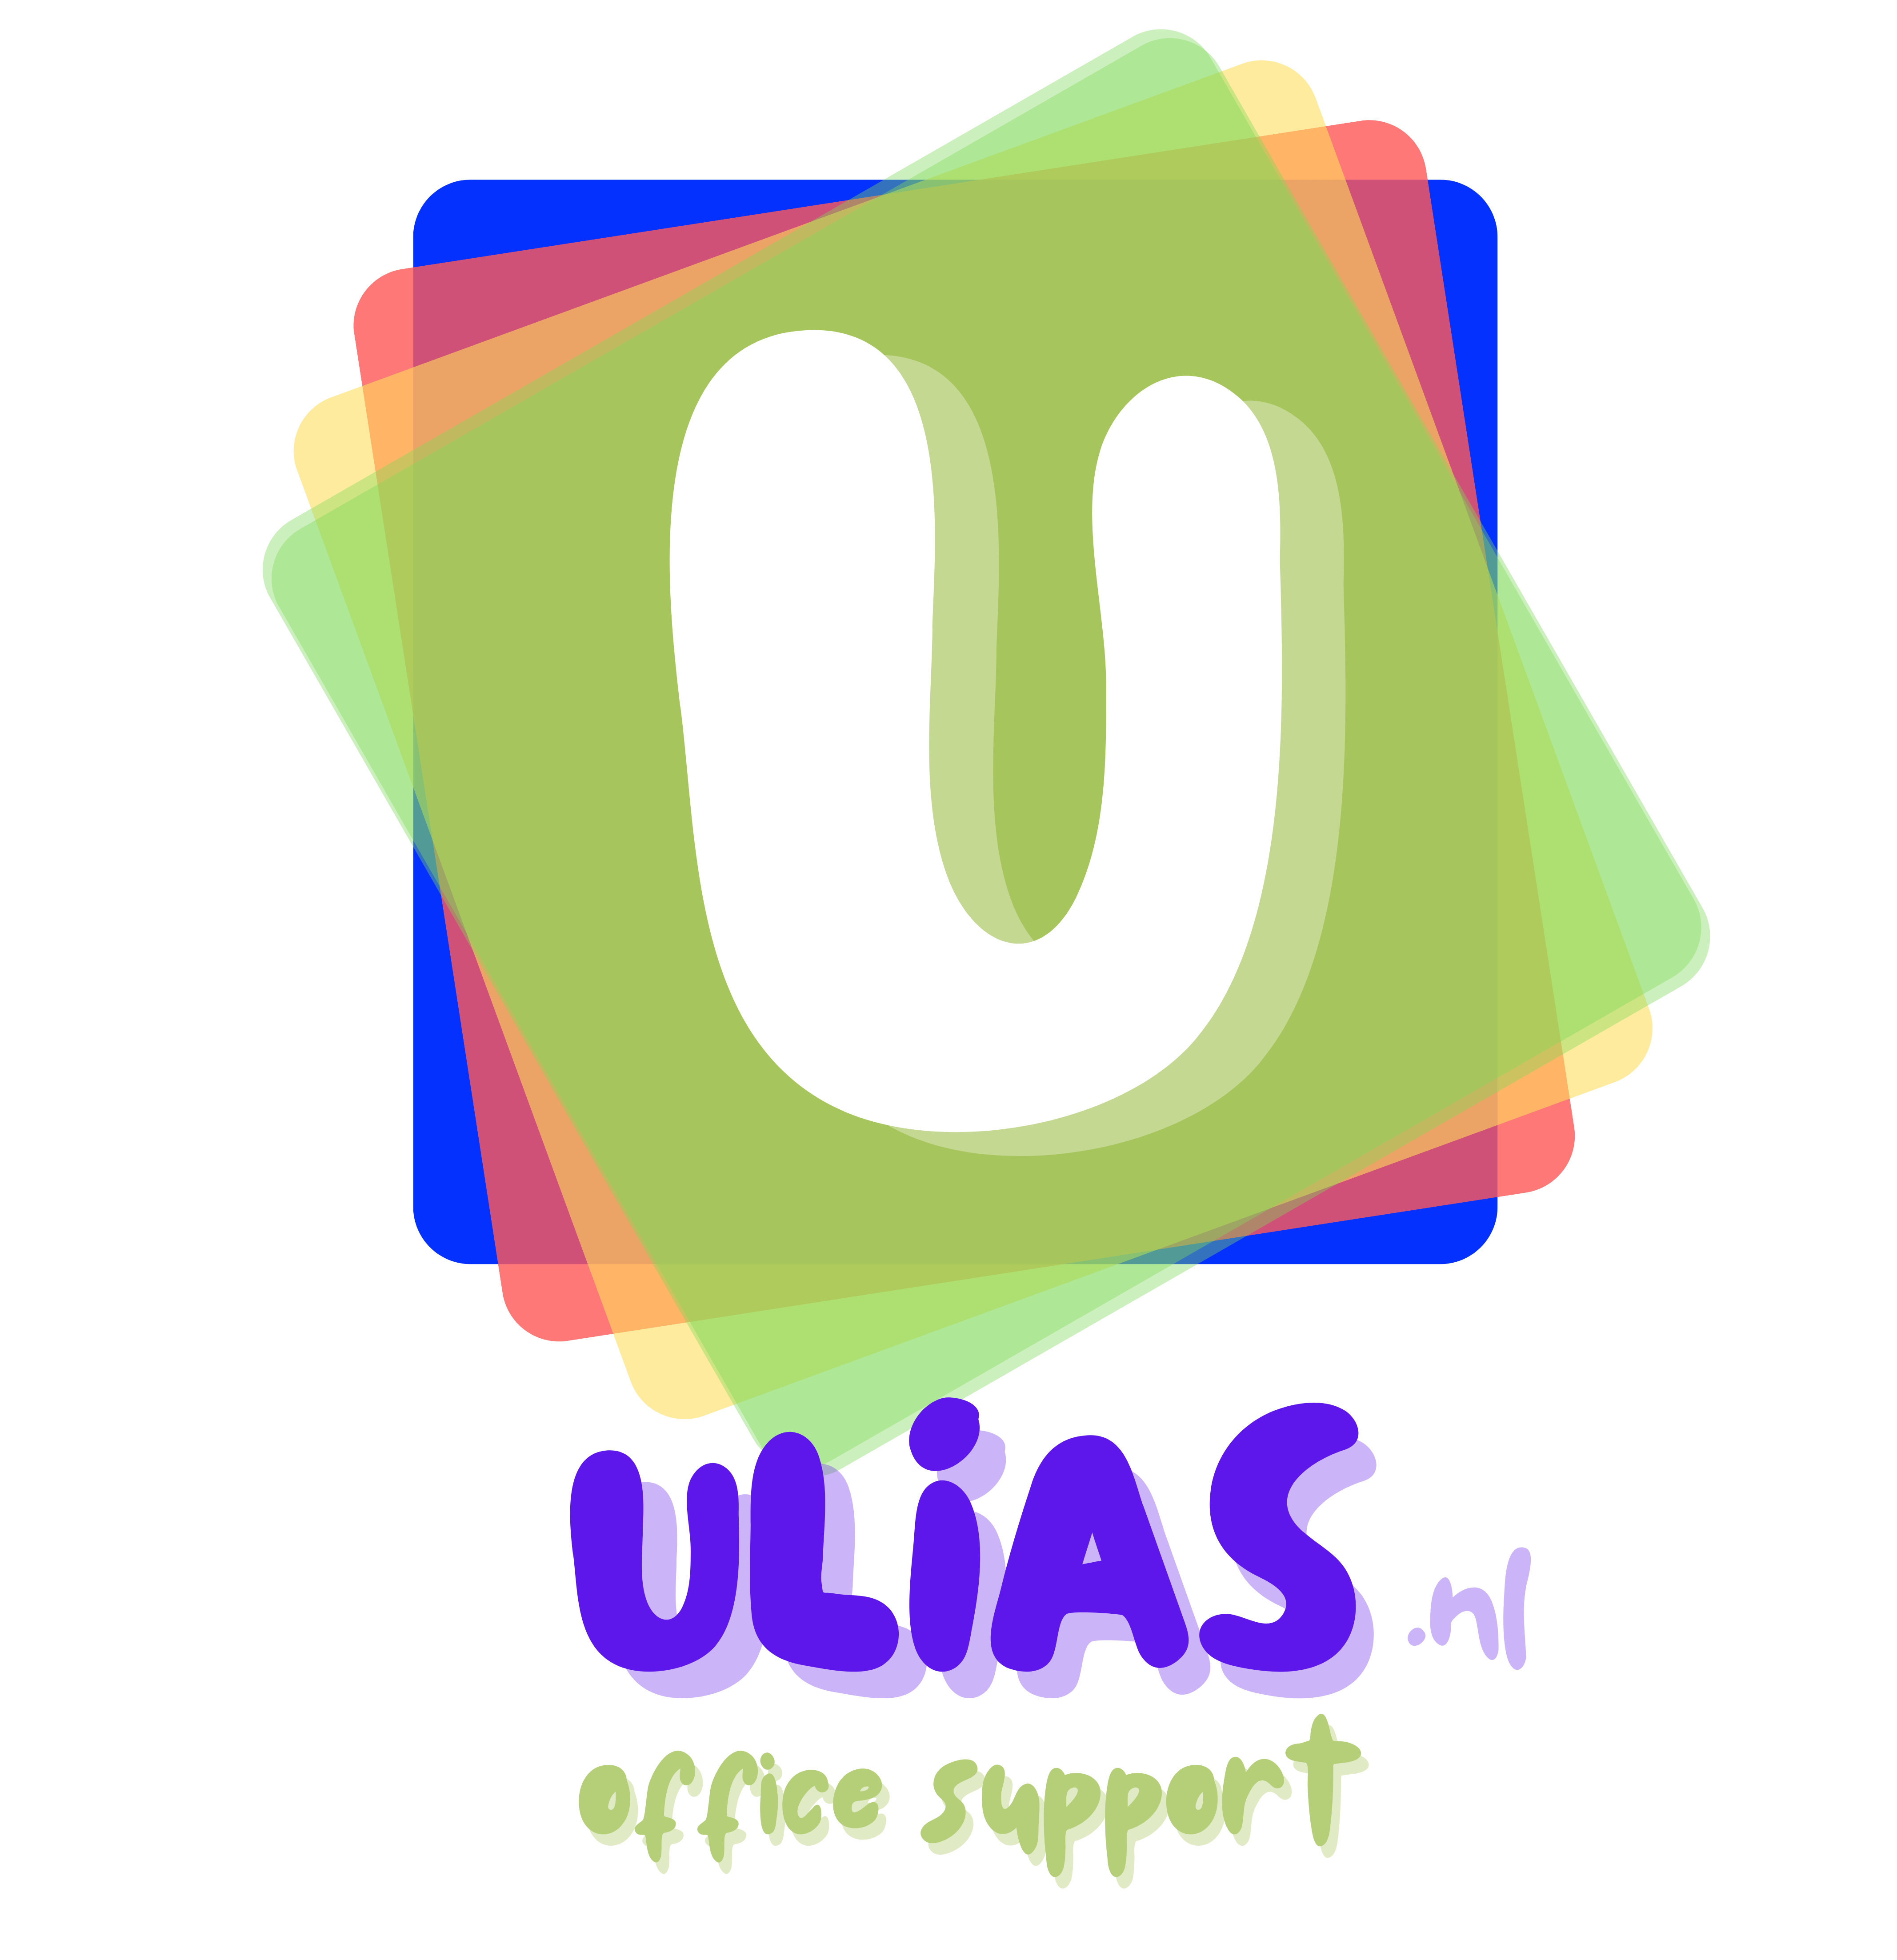 Ulias office support